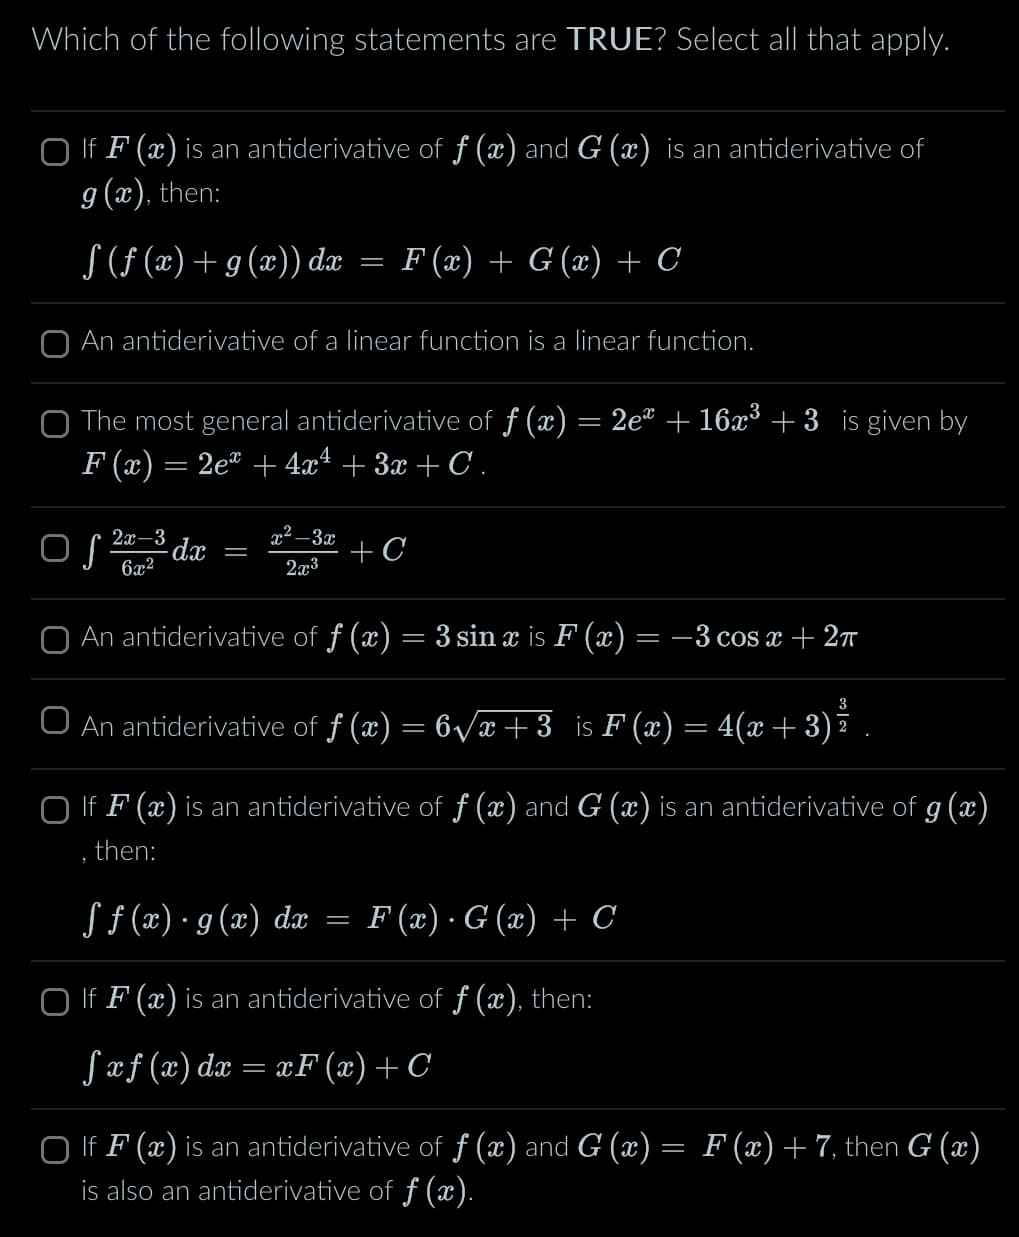 Which of the following statements are TRUE? Select all that apply.
If F(x) is an antiderivative of f (x) and G (x) is an antiderivative of
g(x), then:
§ (ƒ (x) + g(x)) dx
=
F(x) + G(x) + C
An antiderivative of a linear function is a linear function.
The most general antiderivative of ƒ (x) = 2e² + 16x³ +3 is given by
F(x) = 2ex +4x² +3x+C .
○ √ 22-3³ dx = x²-3 +C
Of 6x2
2x3
An antiderivative of ƒ (x) = 3 sin x is F (x) = −3 cos x + 2π
3
An antiderivative of ƒ (x) = 6√√x+3 is F(x) = 4(x+3)ź
☐ If F(x) is an antiderivative of ƒ (x) and G (x) is an antiderivative of g(x)
then:
ƒ ƒ (x) · g(x) dx
=
F(x) · G (x) + C
☐ If F(x) is an antiderivative of f (x), then:
fxf(x) dx = xF(x) +C
If F(x) is an antiderivative of f (x) and G (x) = F(x) + 7, then G (x)
is also an antiderivative of ƒ (x).